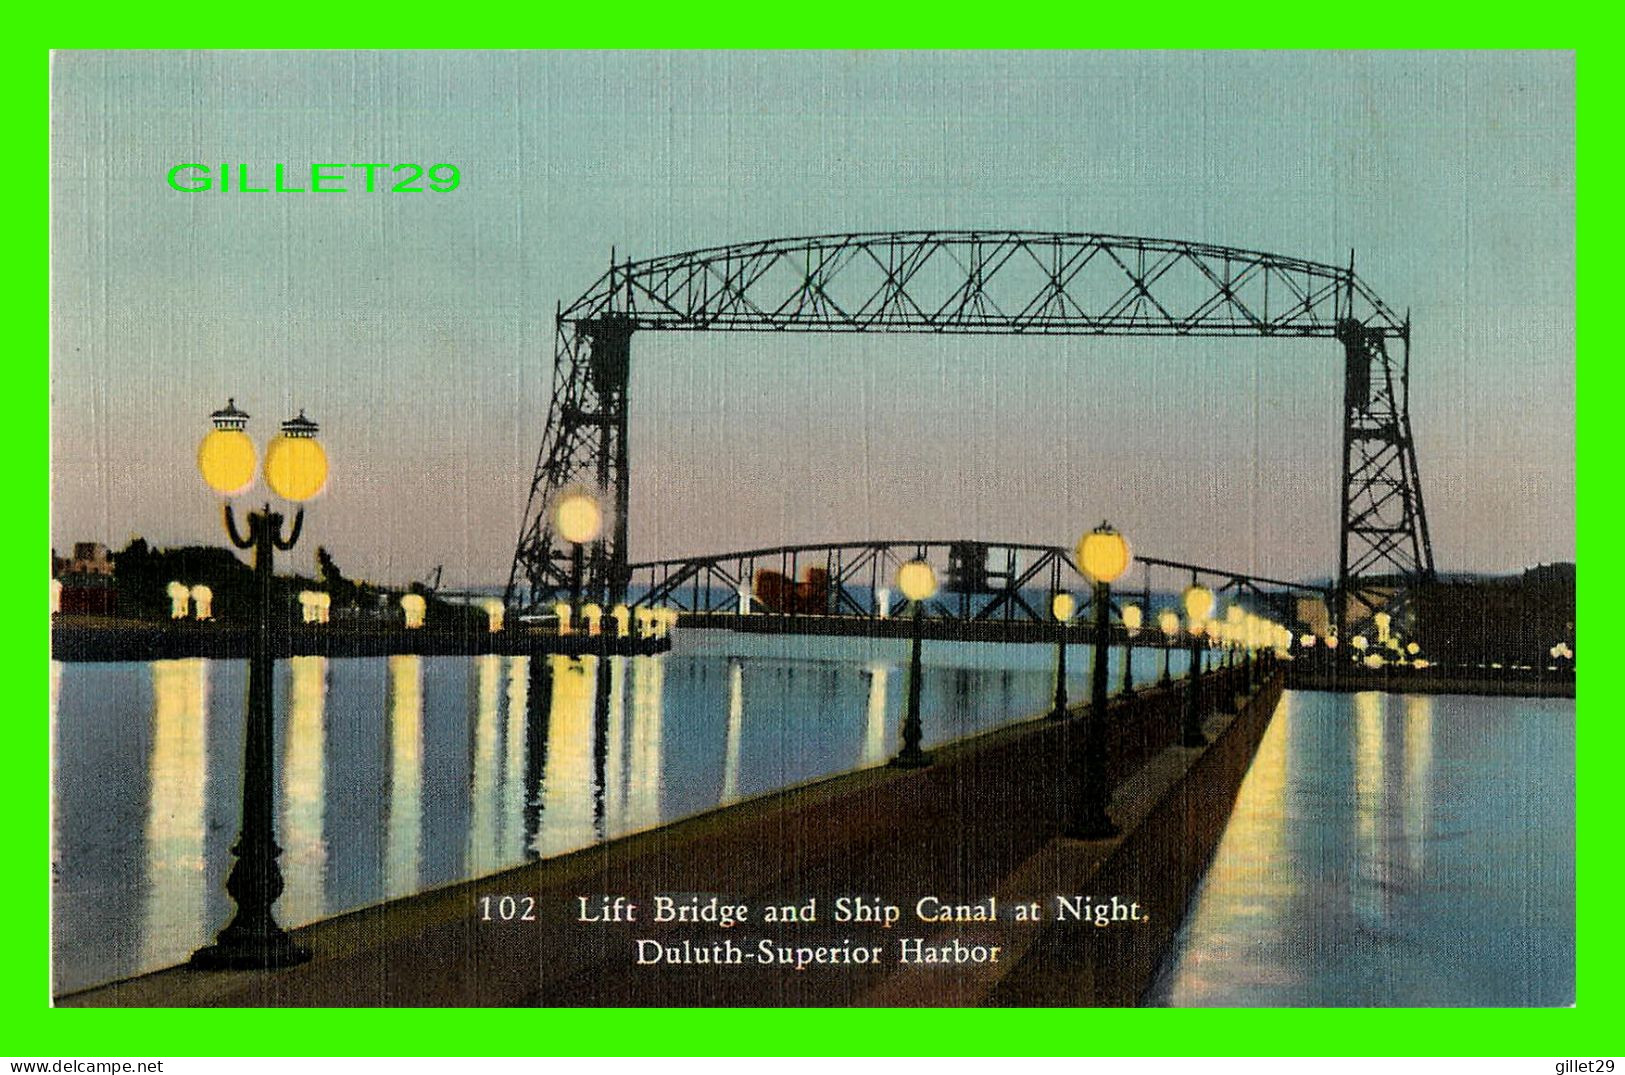 DULUTH, MN - LIFT BRIDGE AND SHIP CANAL AT NIGHT DULUTH-SUPERIOR HARBOR - ST MARIE'S GOPHER NEWS CO - - Duluth